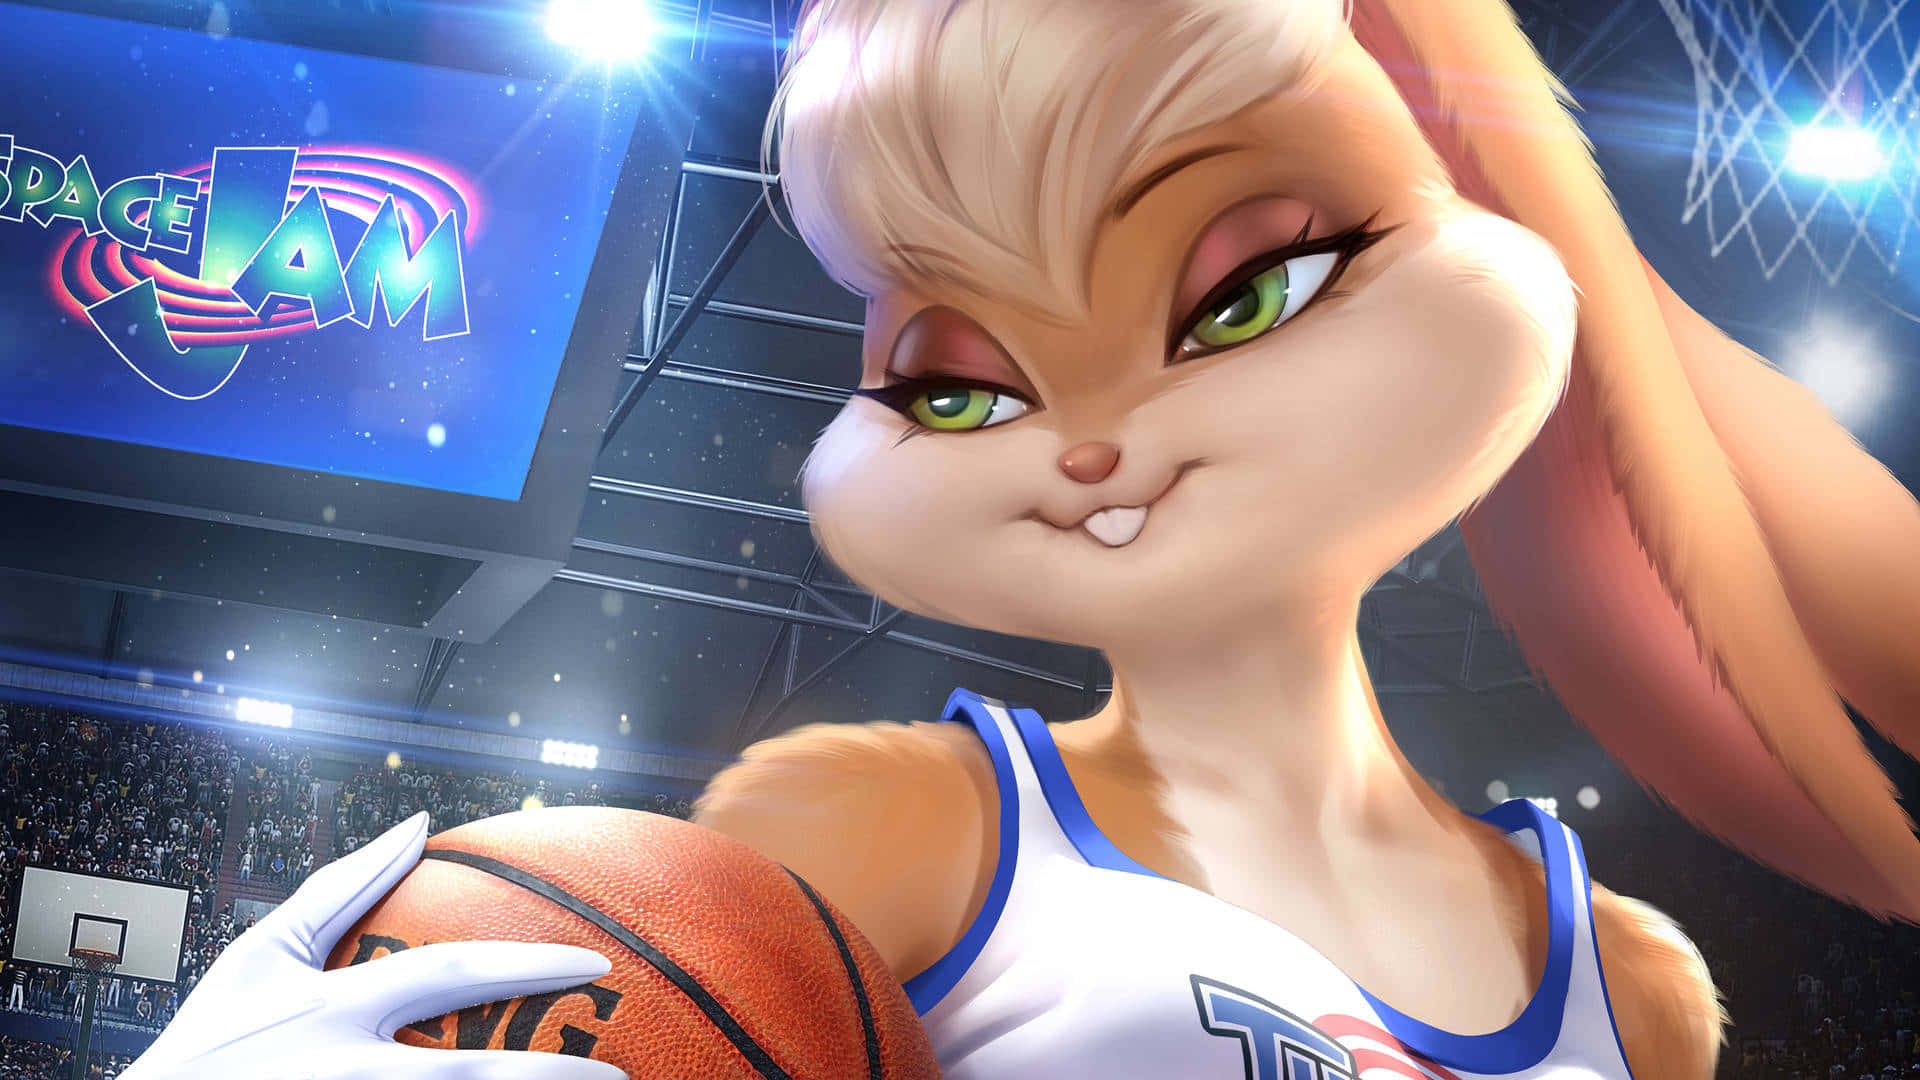 "Experience the Thrill of Space Jam with Cool Space Jam" Wallpaper